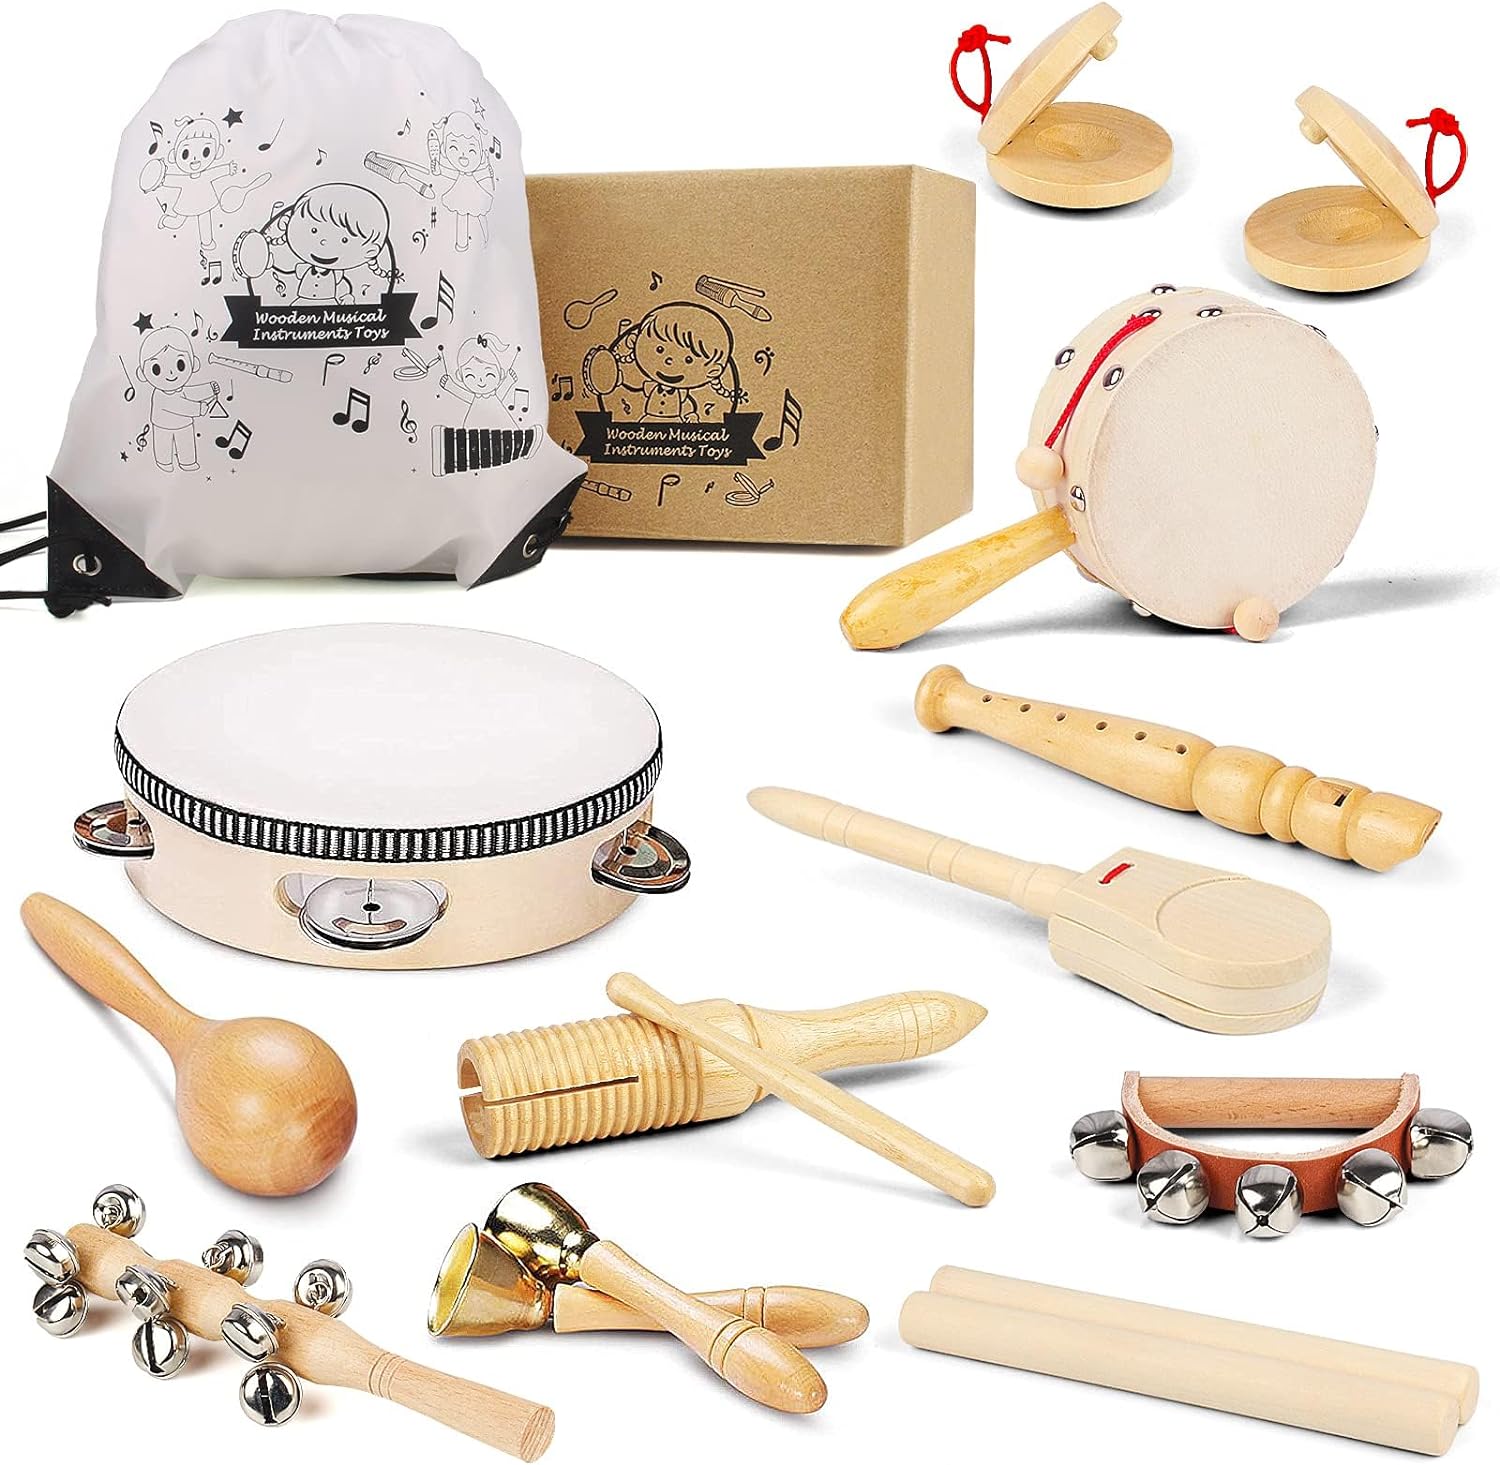 Limited-Time Specials! Chriffer Kids Musical Instruments Toys, Percussion Instruments Set with Storage Bag, Preschool Educational Music Toys for Boys Girls. Up to 23% Off!